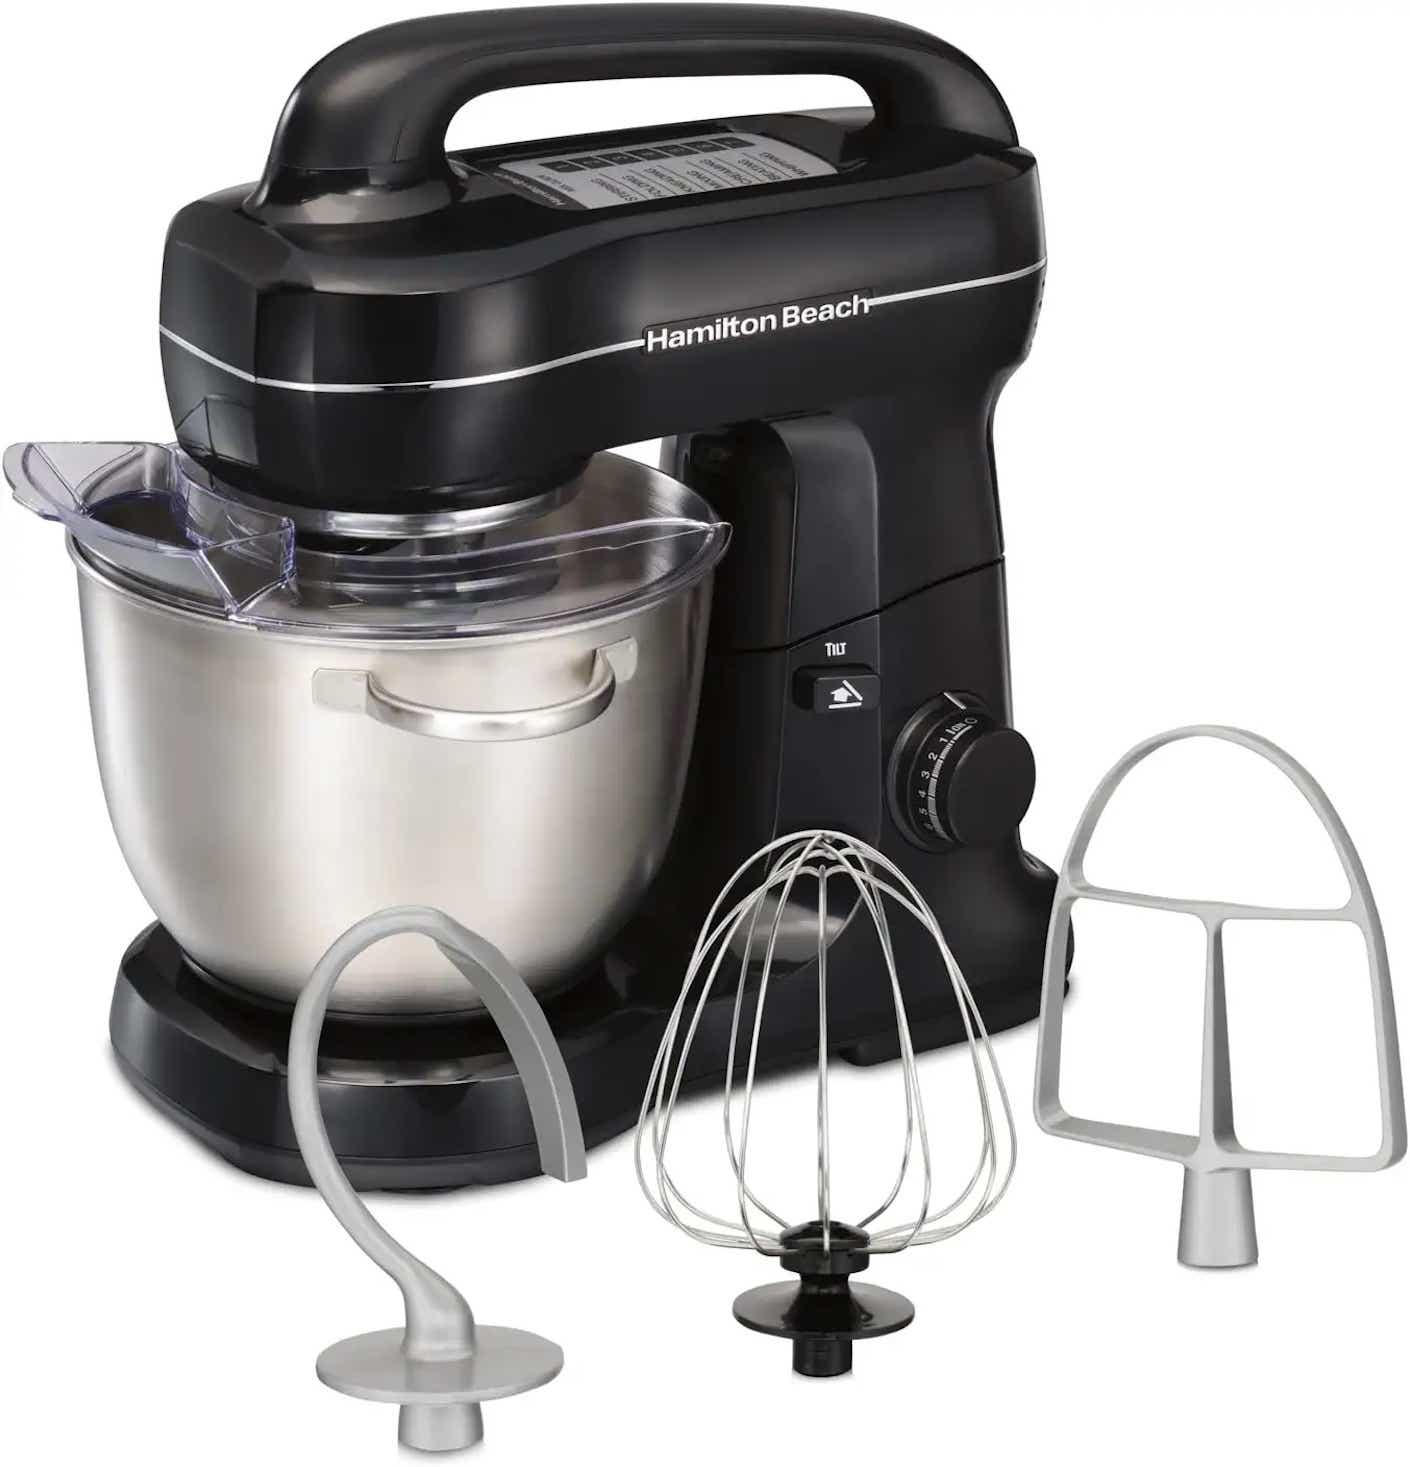 A black stand mixer stands behind a trio of attachments: a white dough hook, a white flat paddle, and a metal whisk.